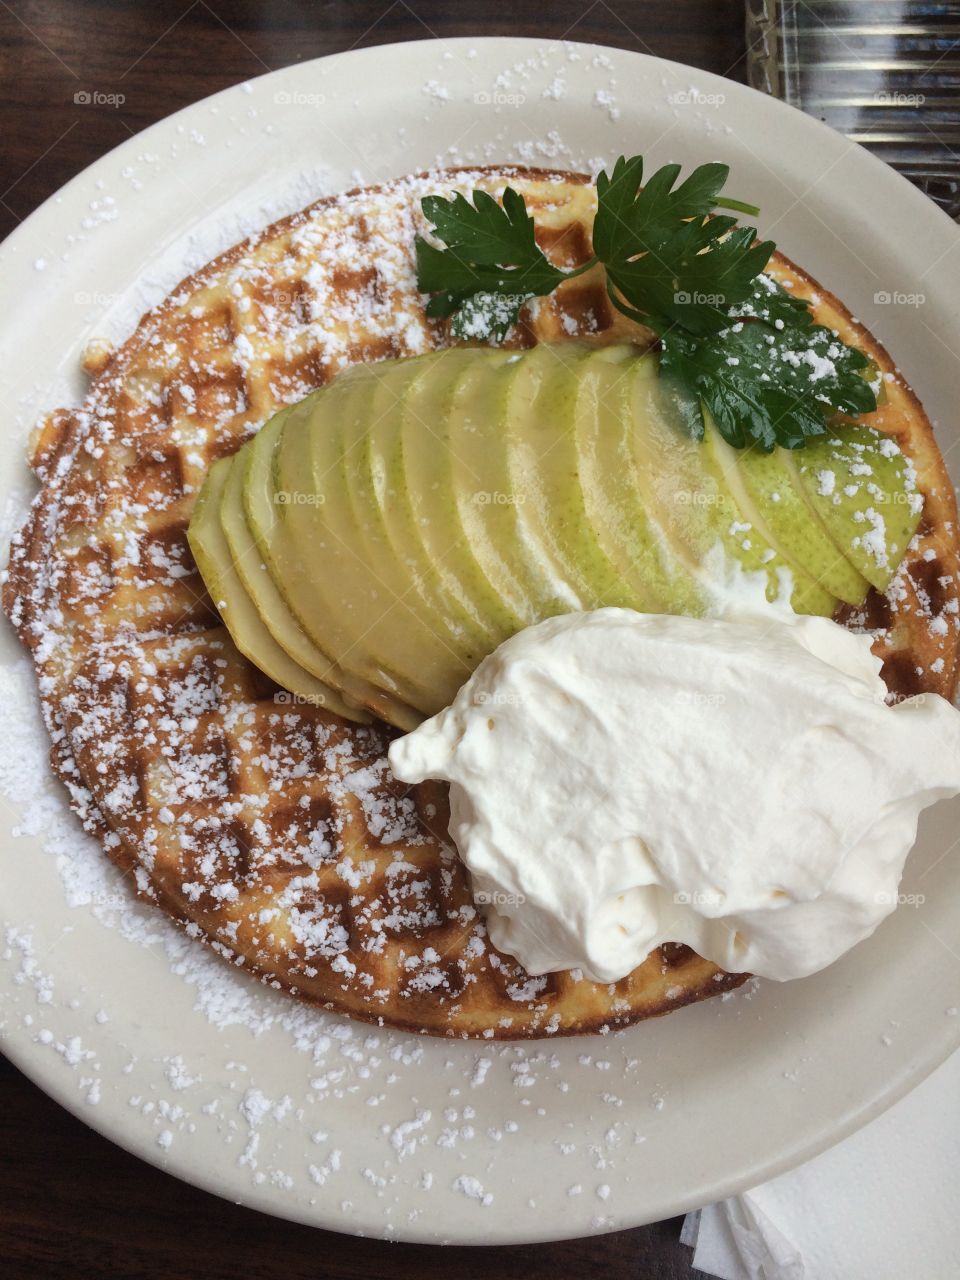 Pear Waffle. Shout out to all the pears...